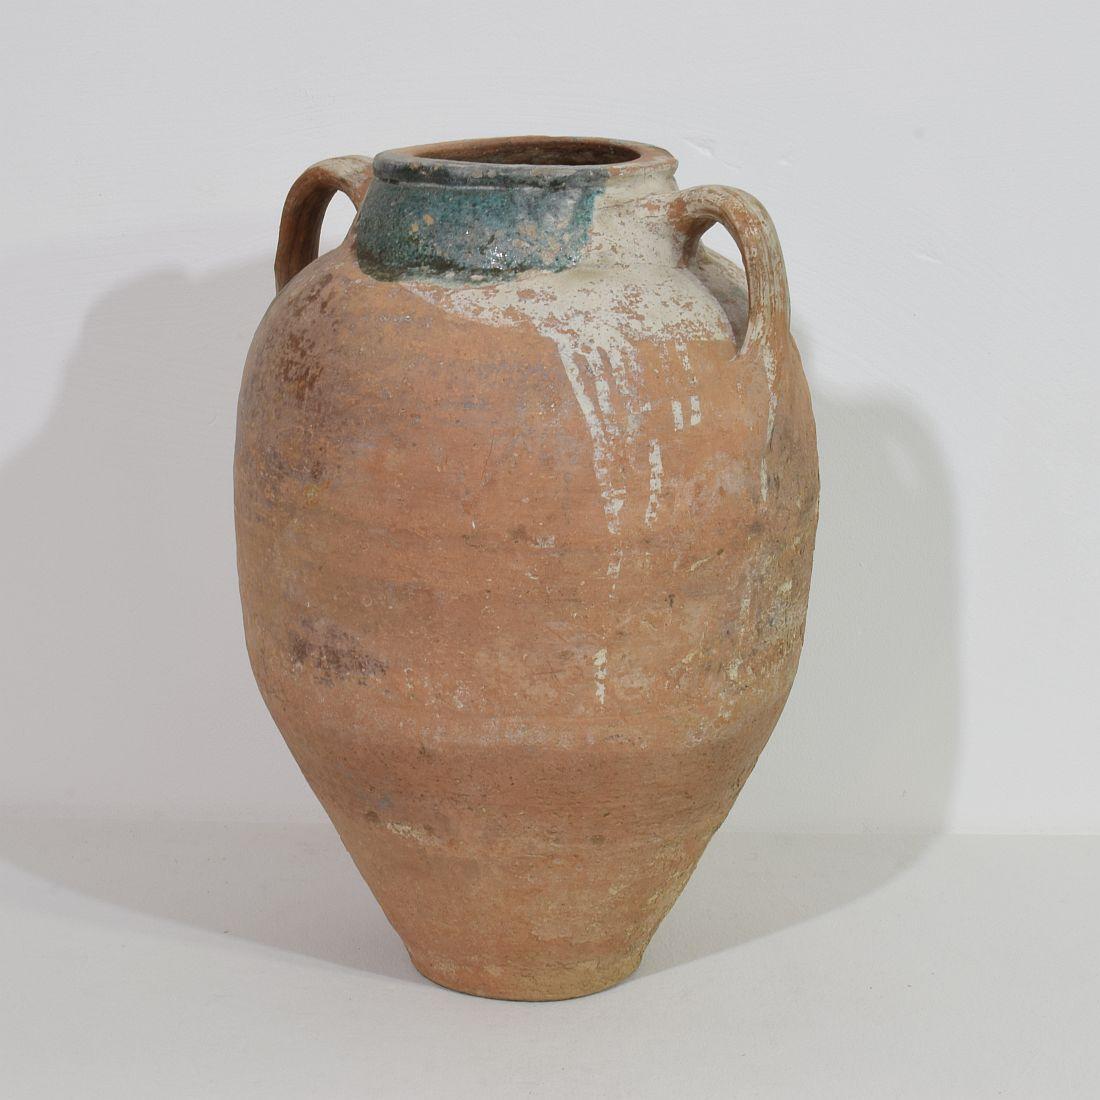 A wonderful and beautiful weathered olive oil jar. Traces of glaze visible.Turkey circa 1850. Weathered